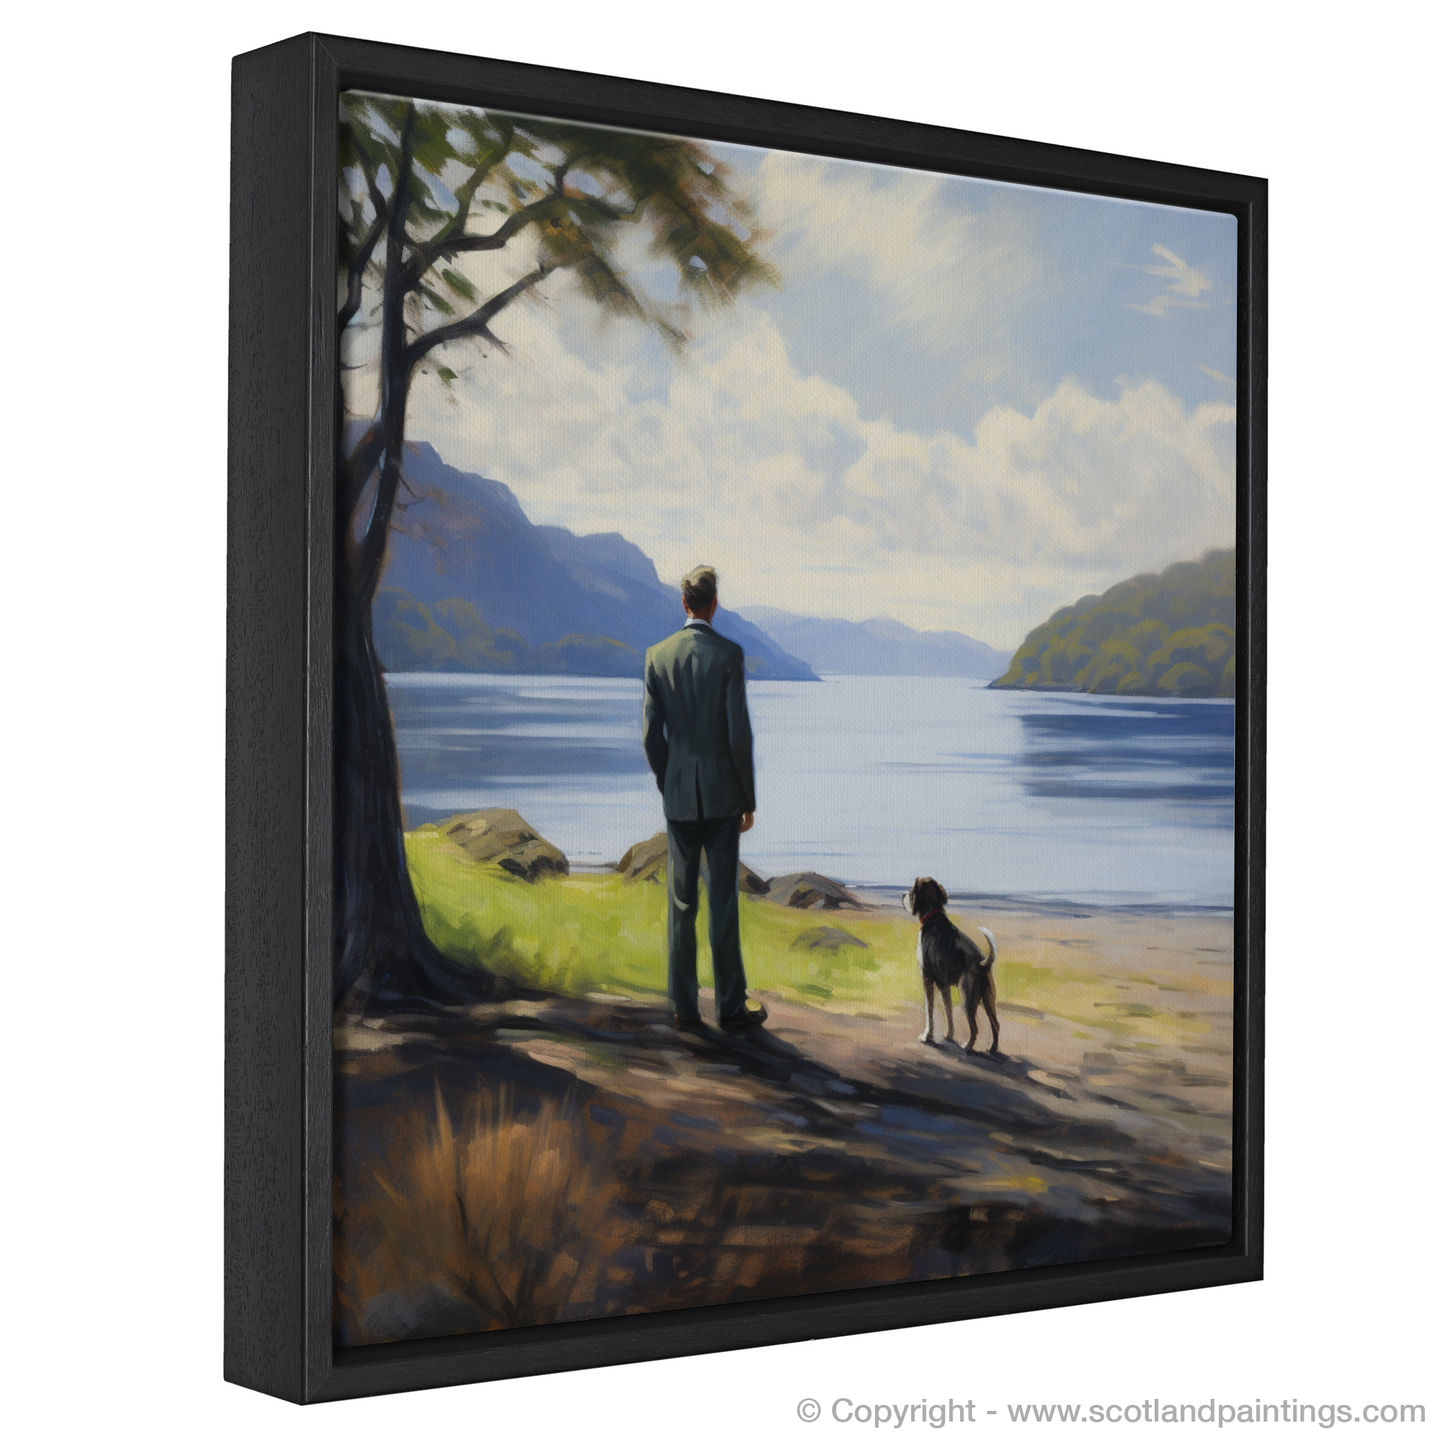 Painting and Art Print of A man walking dog at the side of Loch Lomond entitled "Reflections of Serenity: A Man and His Dog at Loch Lomond".